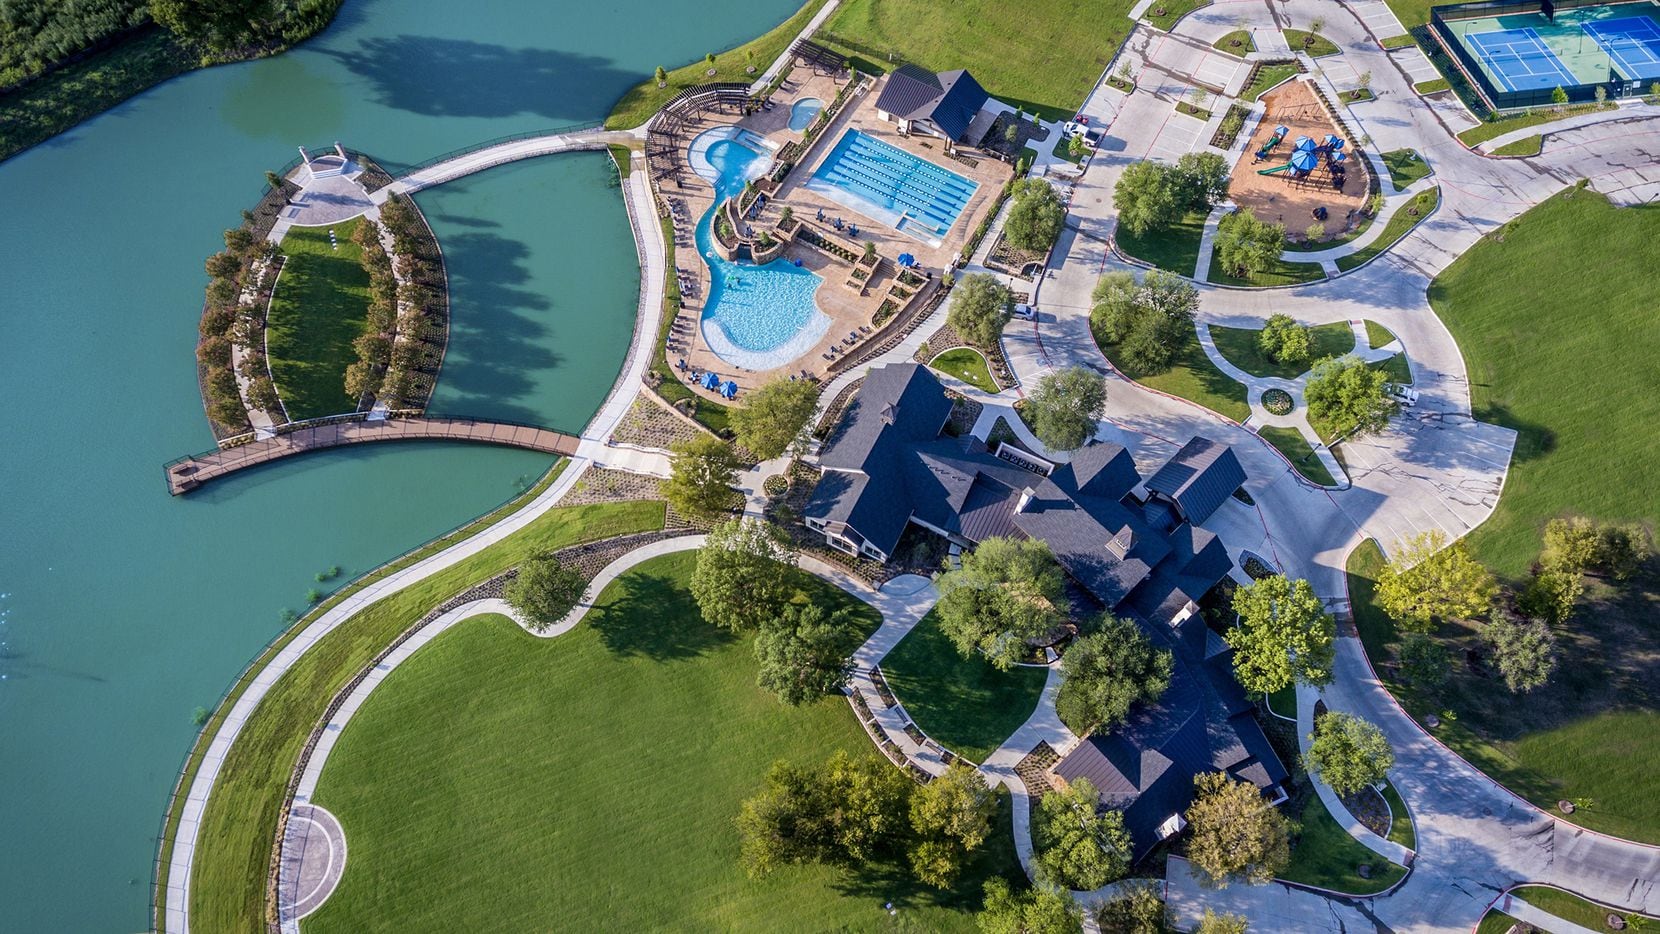 Cambridge Cos.' Mustang Lakes in Celina was named Best Master-Planned Community by the Dallas Builders Association for its resort-style amenities.